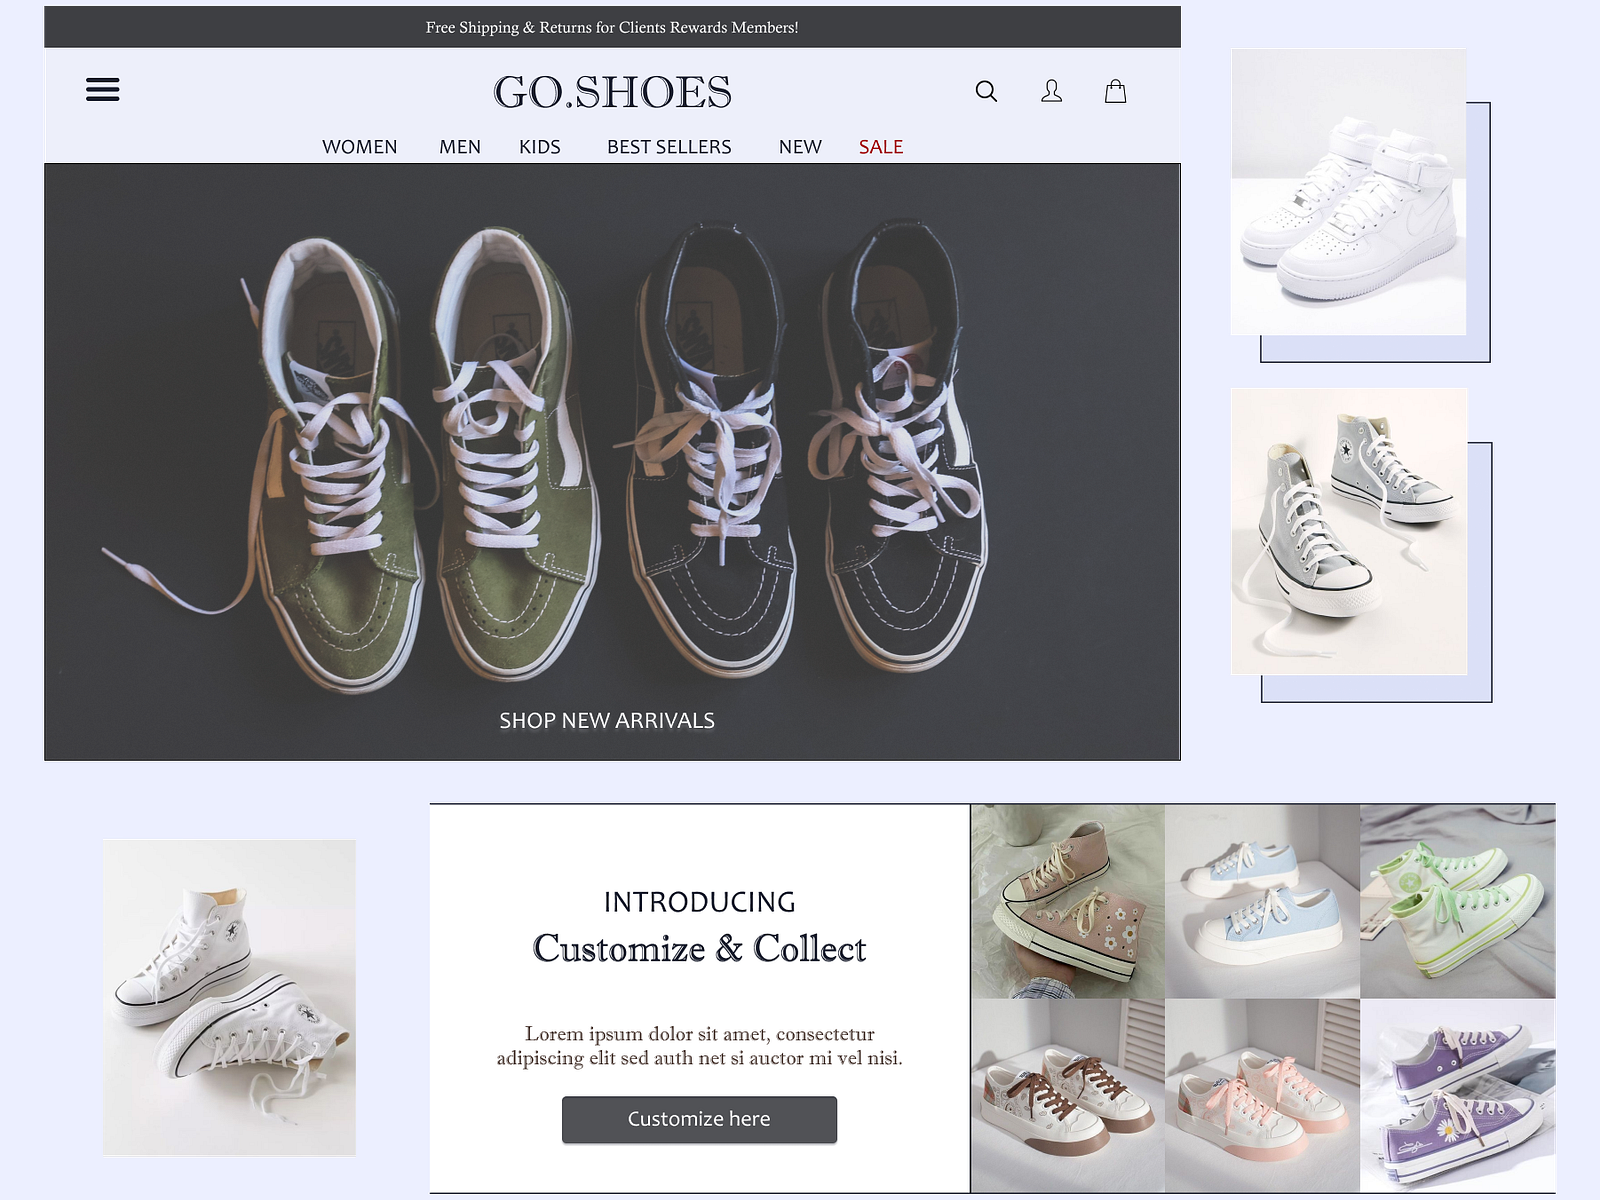 Go Shoes - Online eCommerce store!! by Poorva Diwan on Dribbble